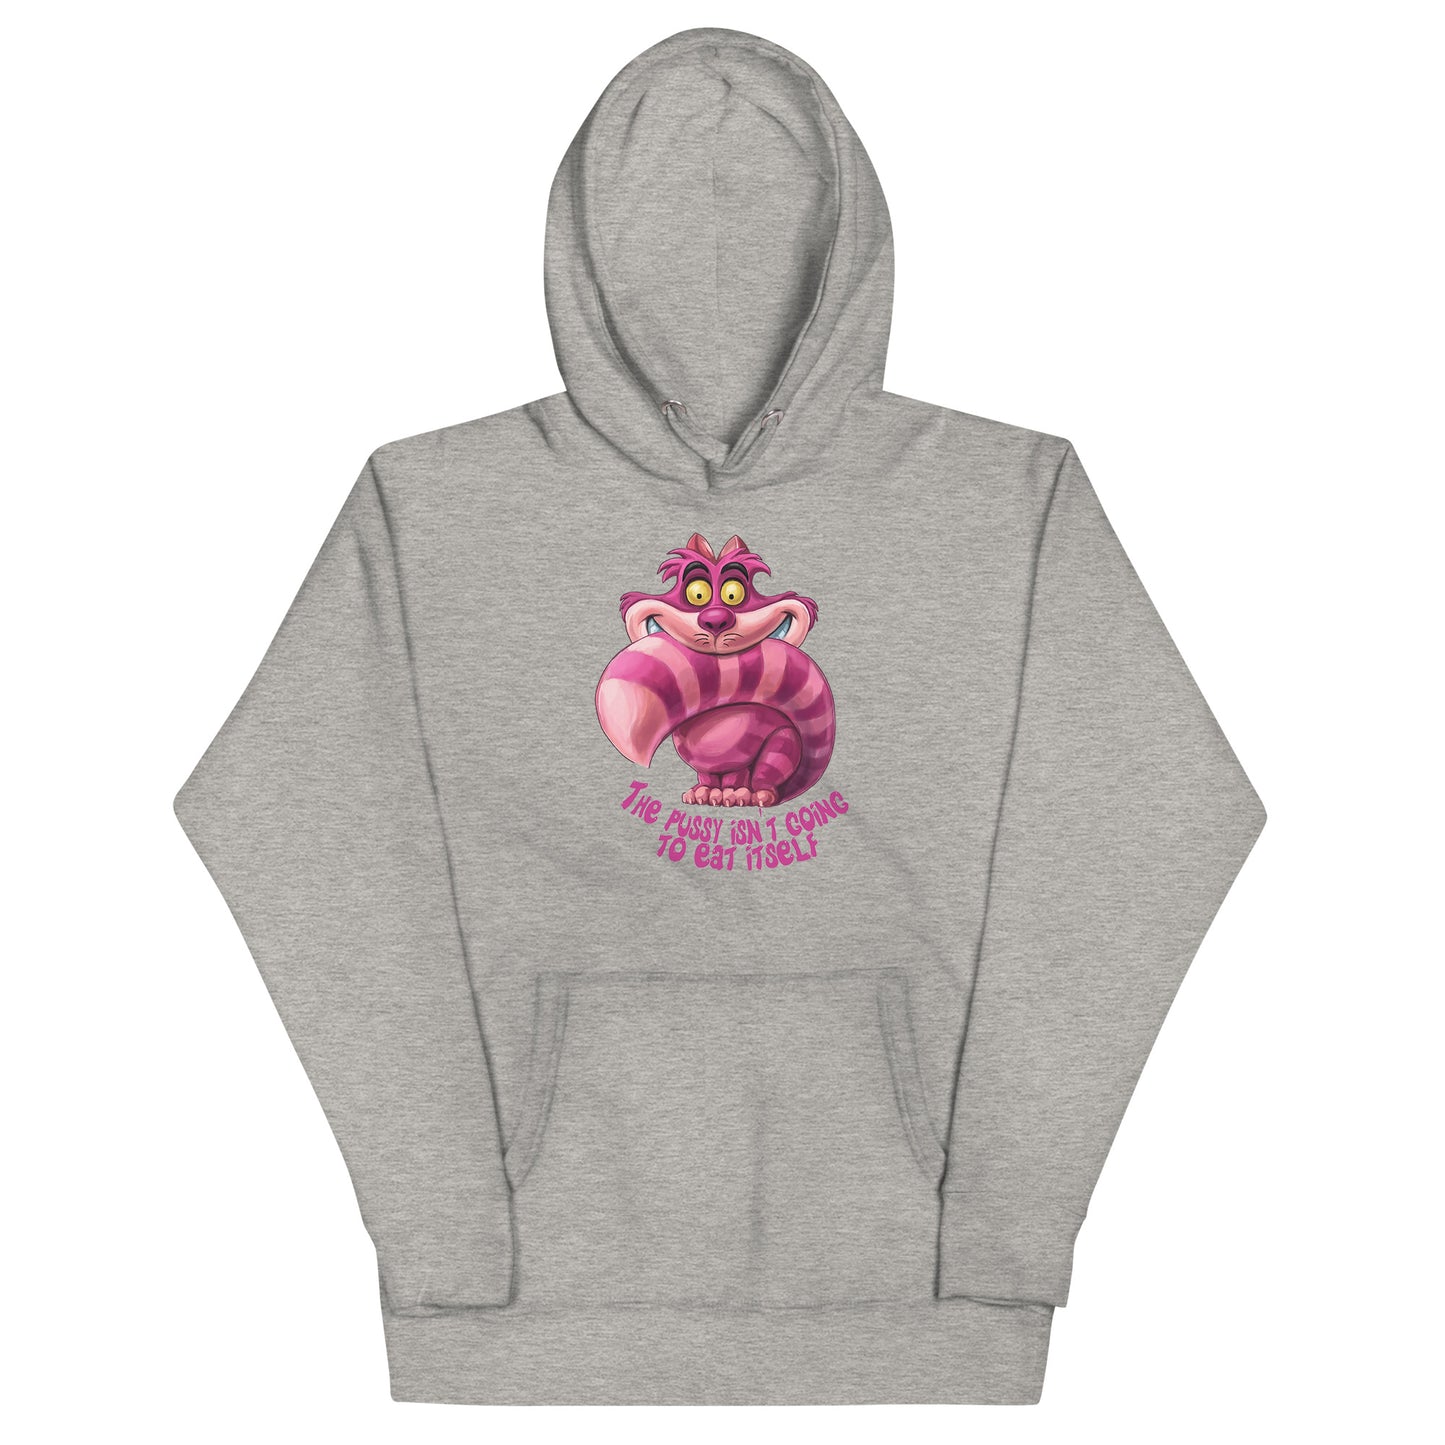 A-Hole Unisex "Eat Pussy"  Hoodie